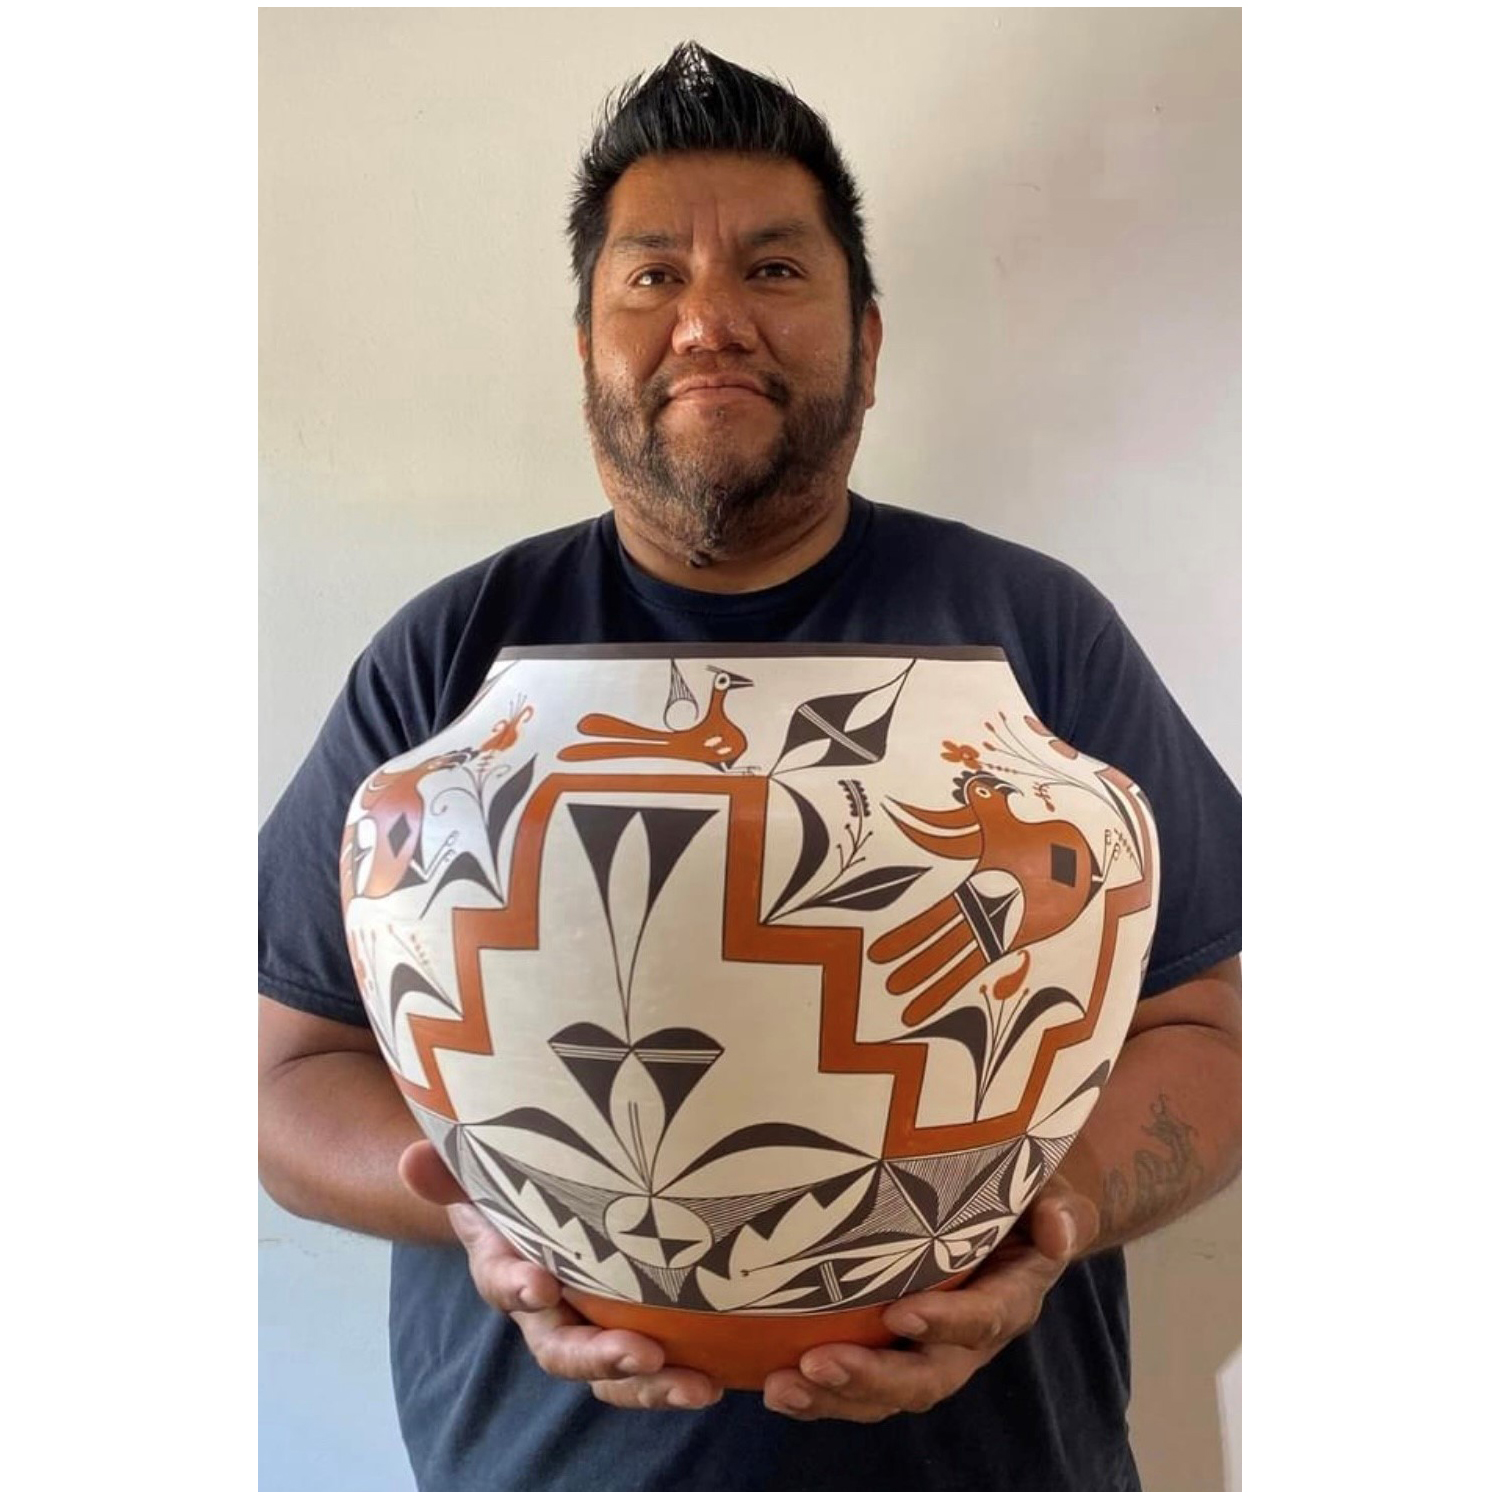 Man with short, dark hair holding a large, round, ceramic pot with geometric designs